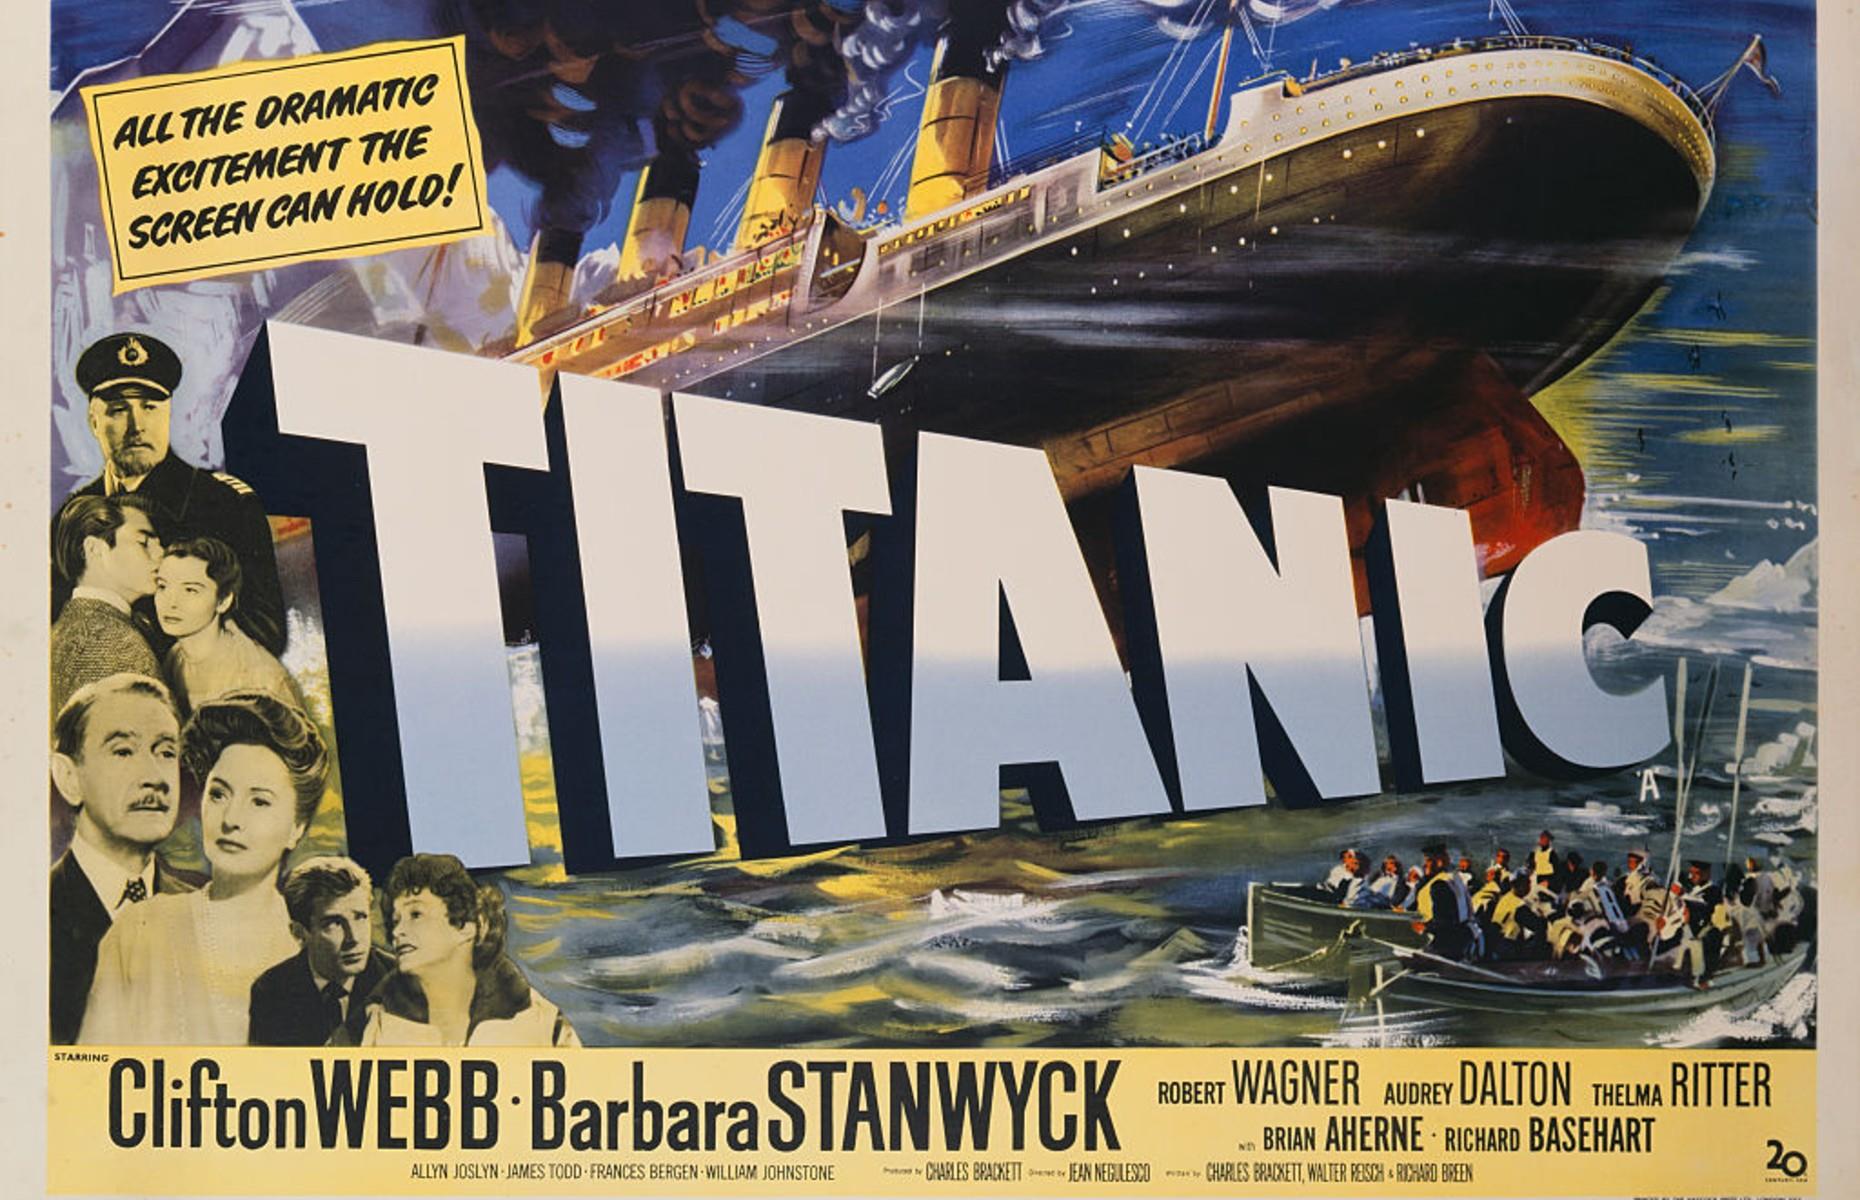 <p>One of the world’s pioneering Titanic enthusiasts was Edward Kamuda. While at high school in the 1950s he read a short story and watched the 1953 film <em>Titanic</em> about the disaster. From then on, Edward was hooked. He wrote to all 87 of the survivors then living and 75 responded. What he collected in terms of letters, mementoes and artefacts from these survivors became the basis for <a href="https://titanichistoricalsociety.org/titanic-museum/">the museum he established in his hometown</a>, Indian Orchard in Springfield, in 1963.</p>